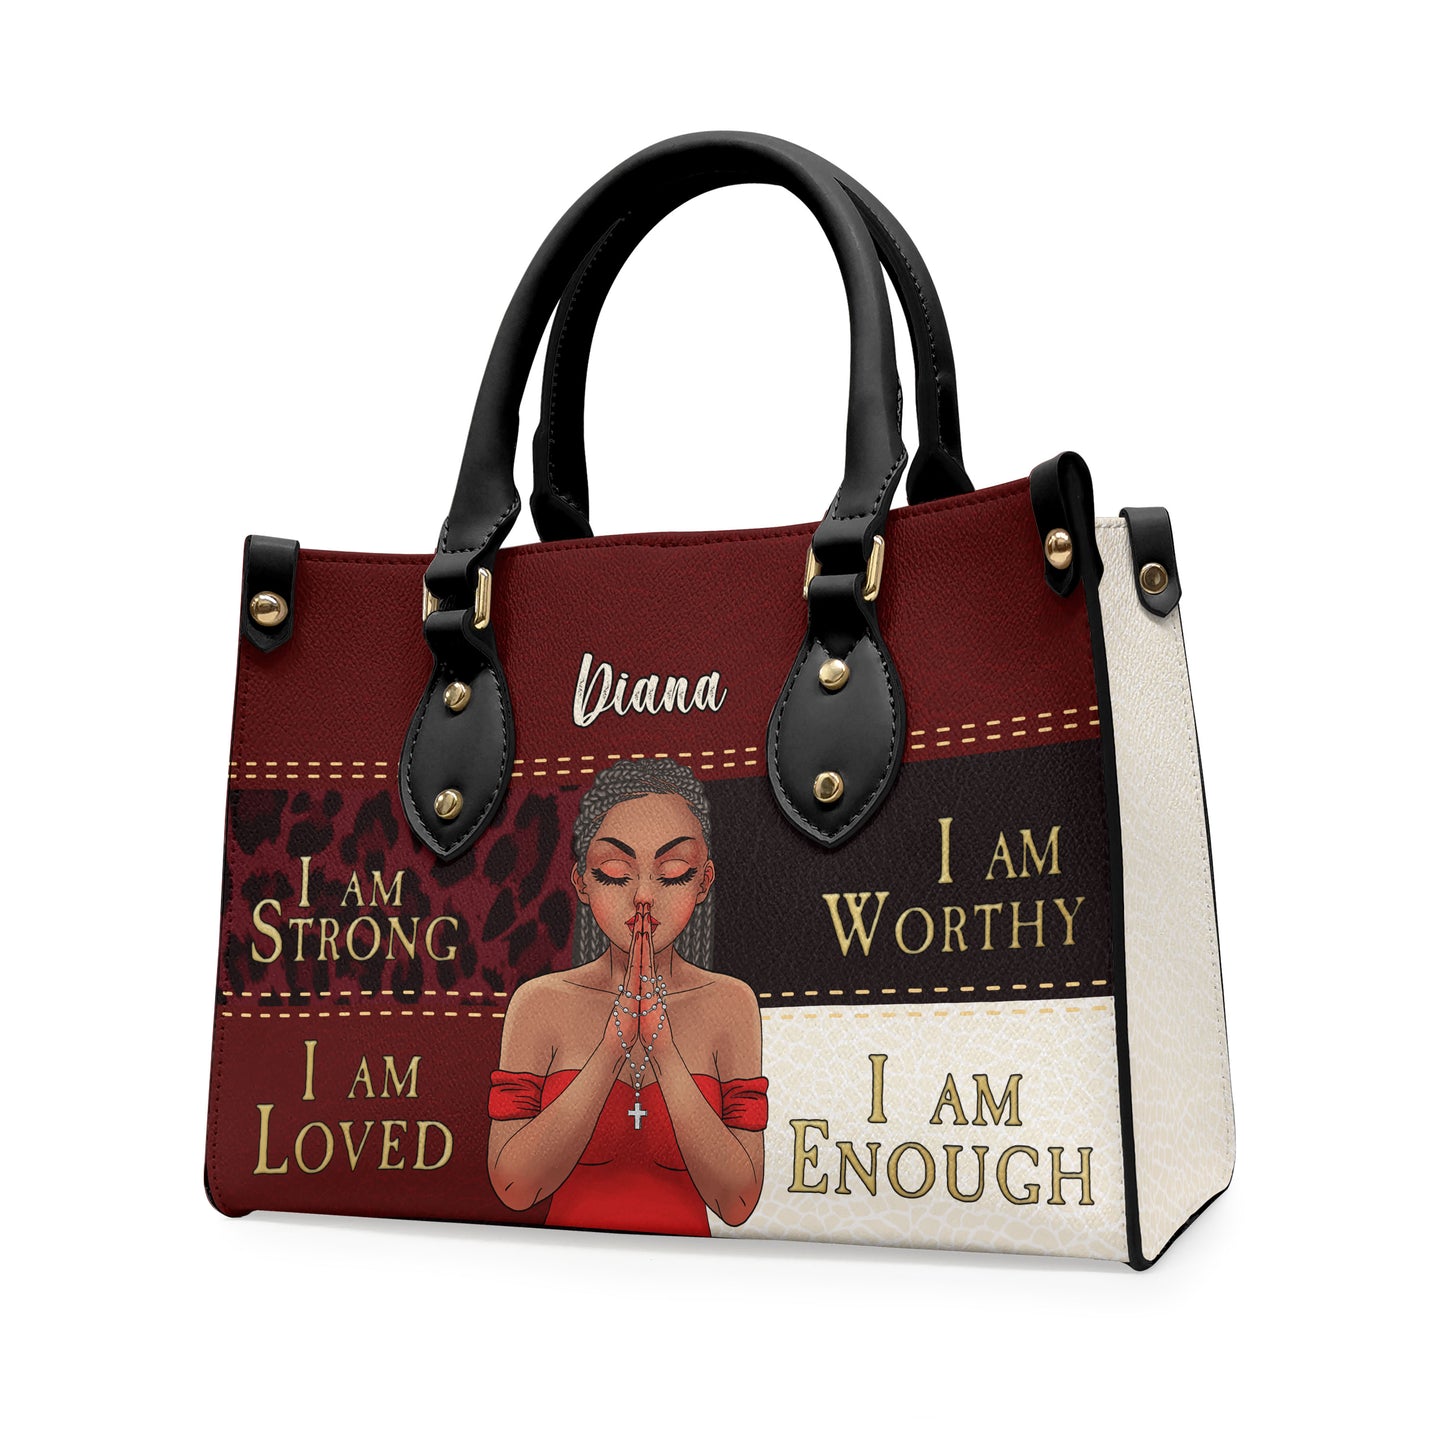 I Am Worthy - Personalized Leather Bag